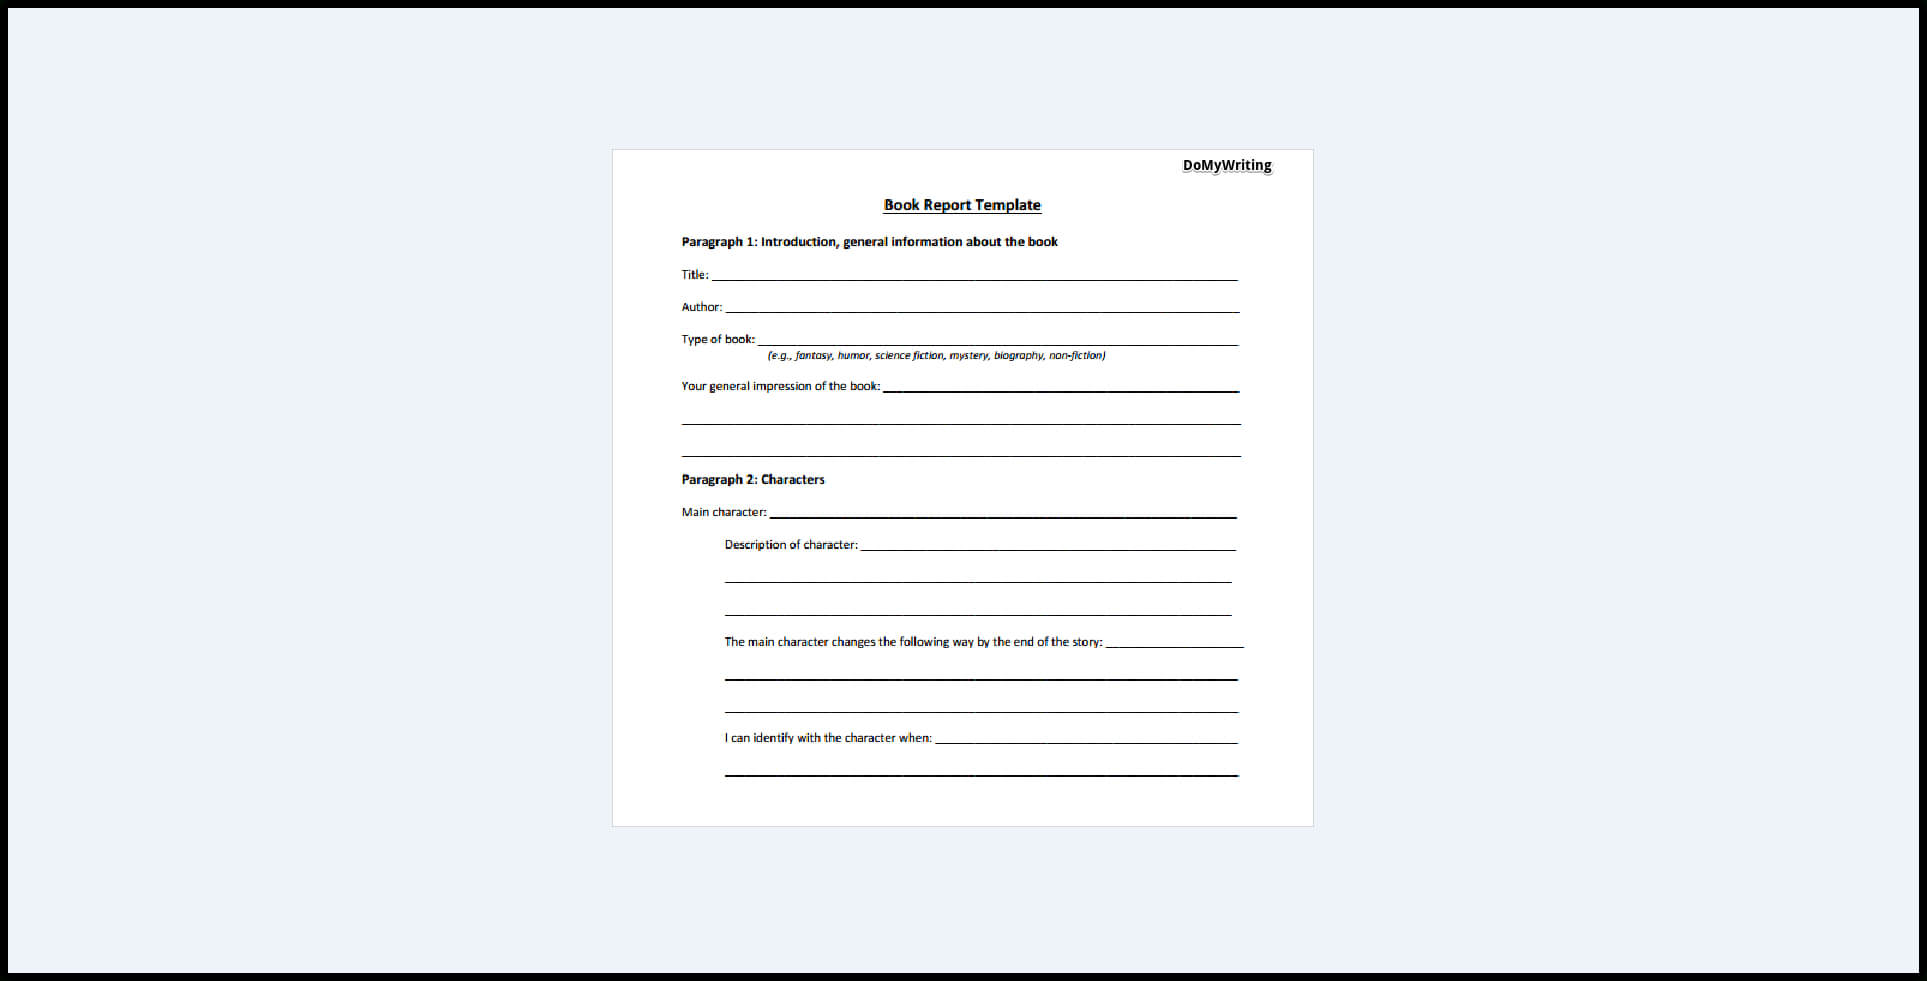 Find Out How To Write An A+ Book Report, Reading Detailed Throughout Biography Book Report Template